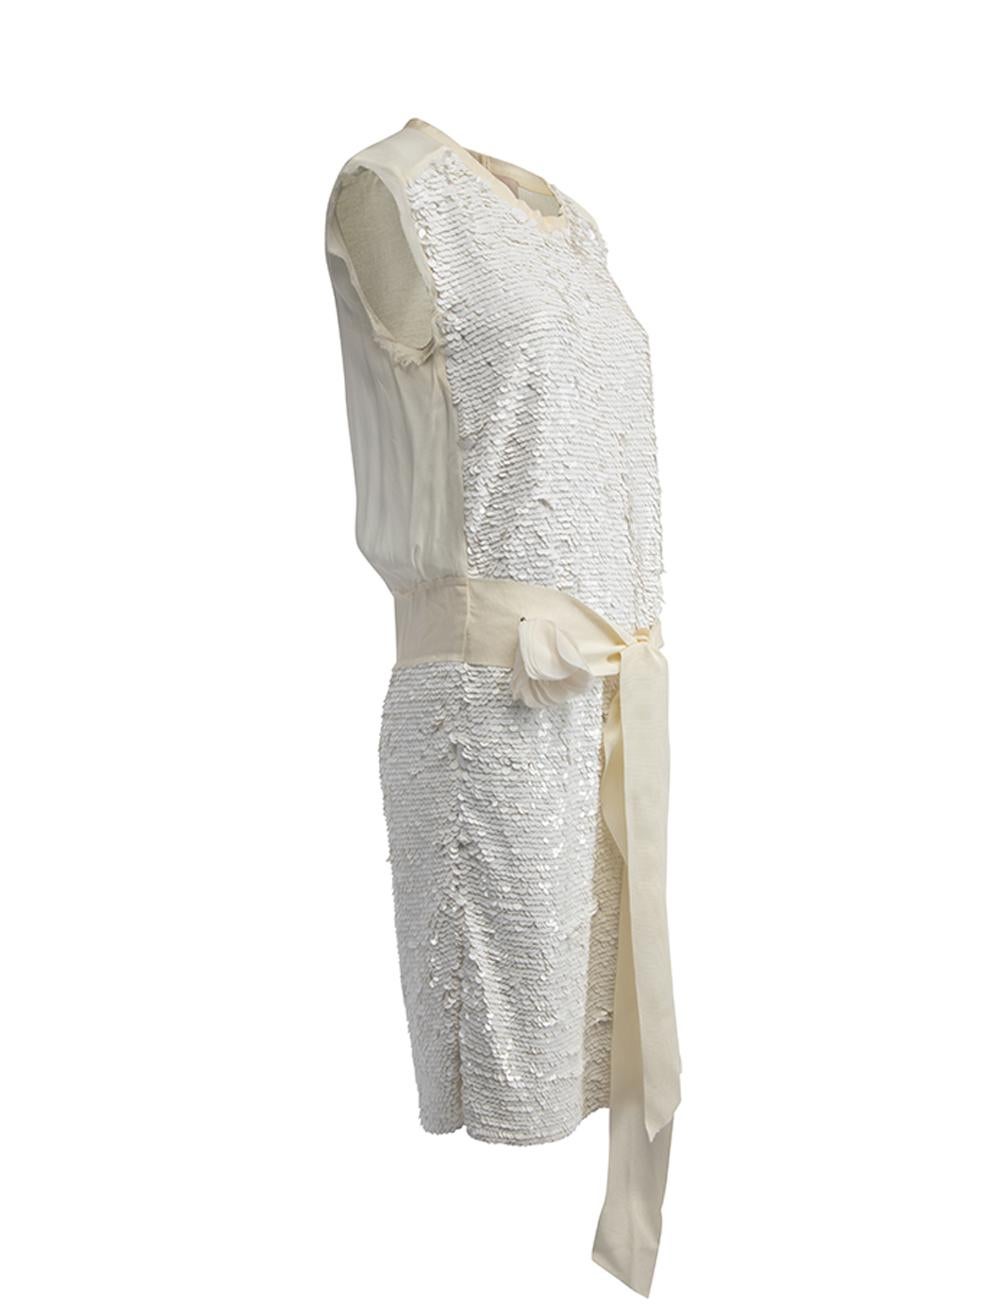 CONDITION is Very good. Minimal wear to dress is evident. Minimal wear to the neckline and flower attachment on this used Lanvin designer resale item. Details Cream Synthetic Sleeveless mini dress Sequinned Round neckline Tie waist ribbon with